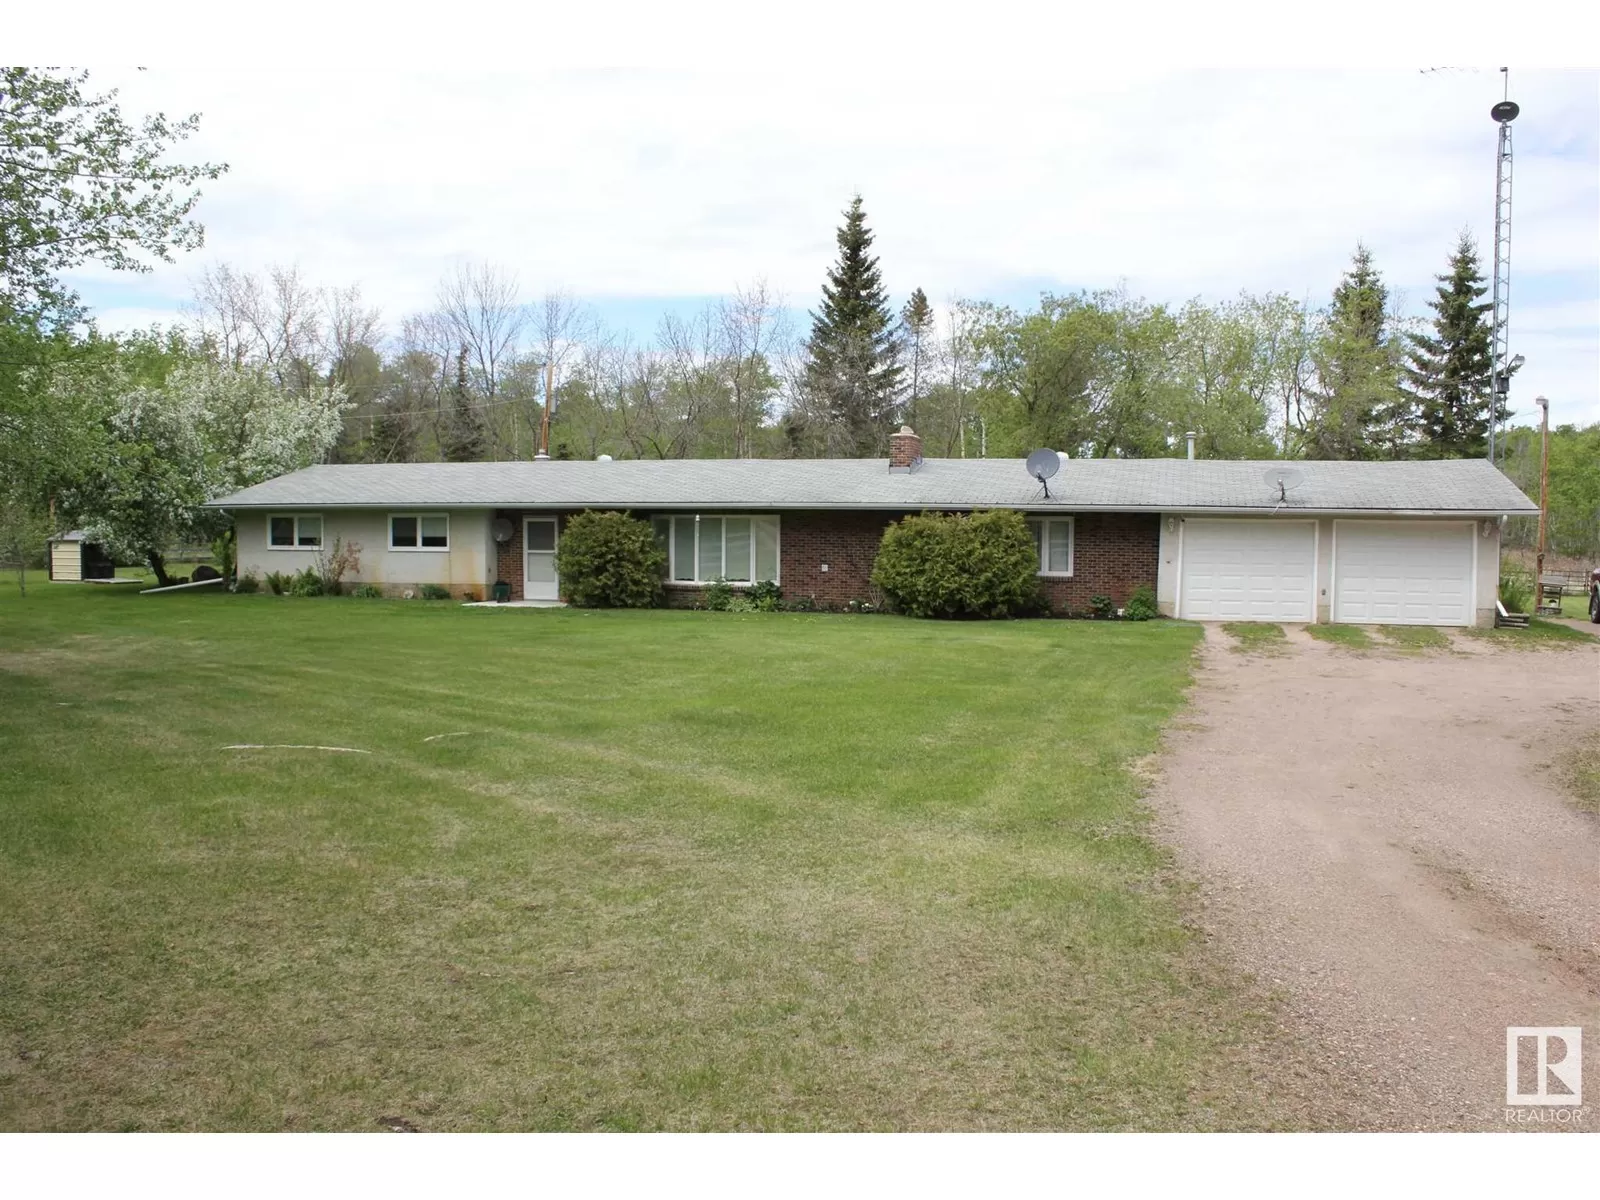 House for rent: 9224 S646, Rural St. Paul County, Alberta T0A 3A0